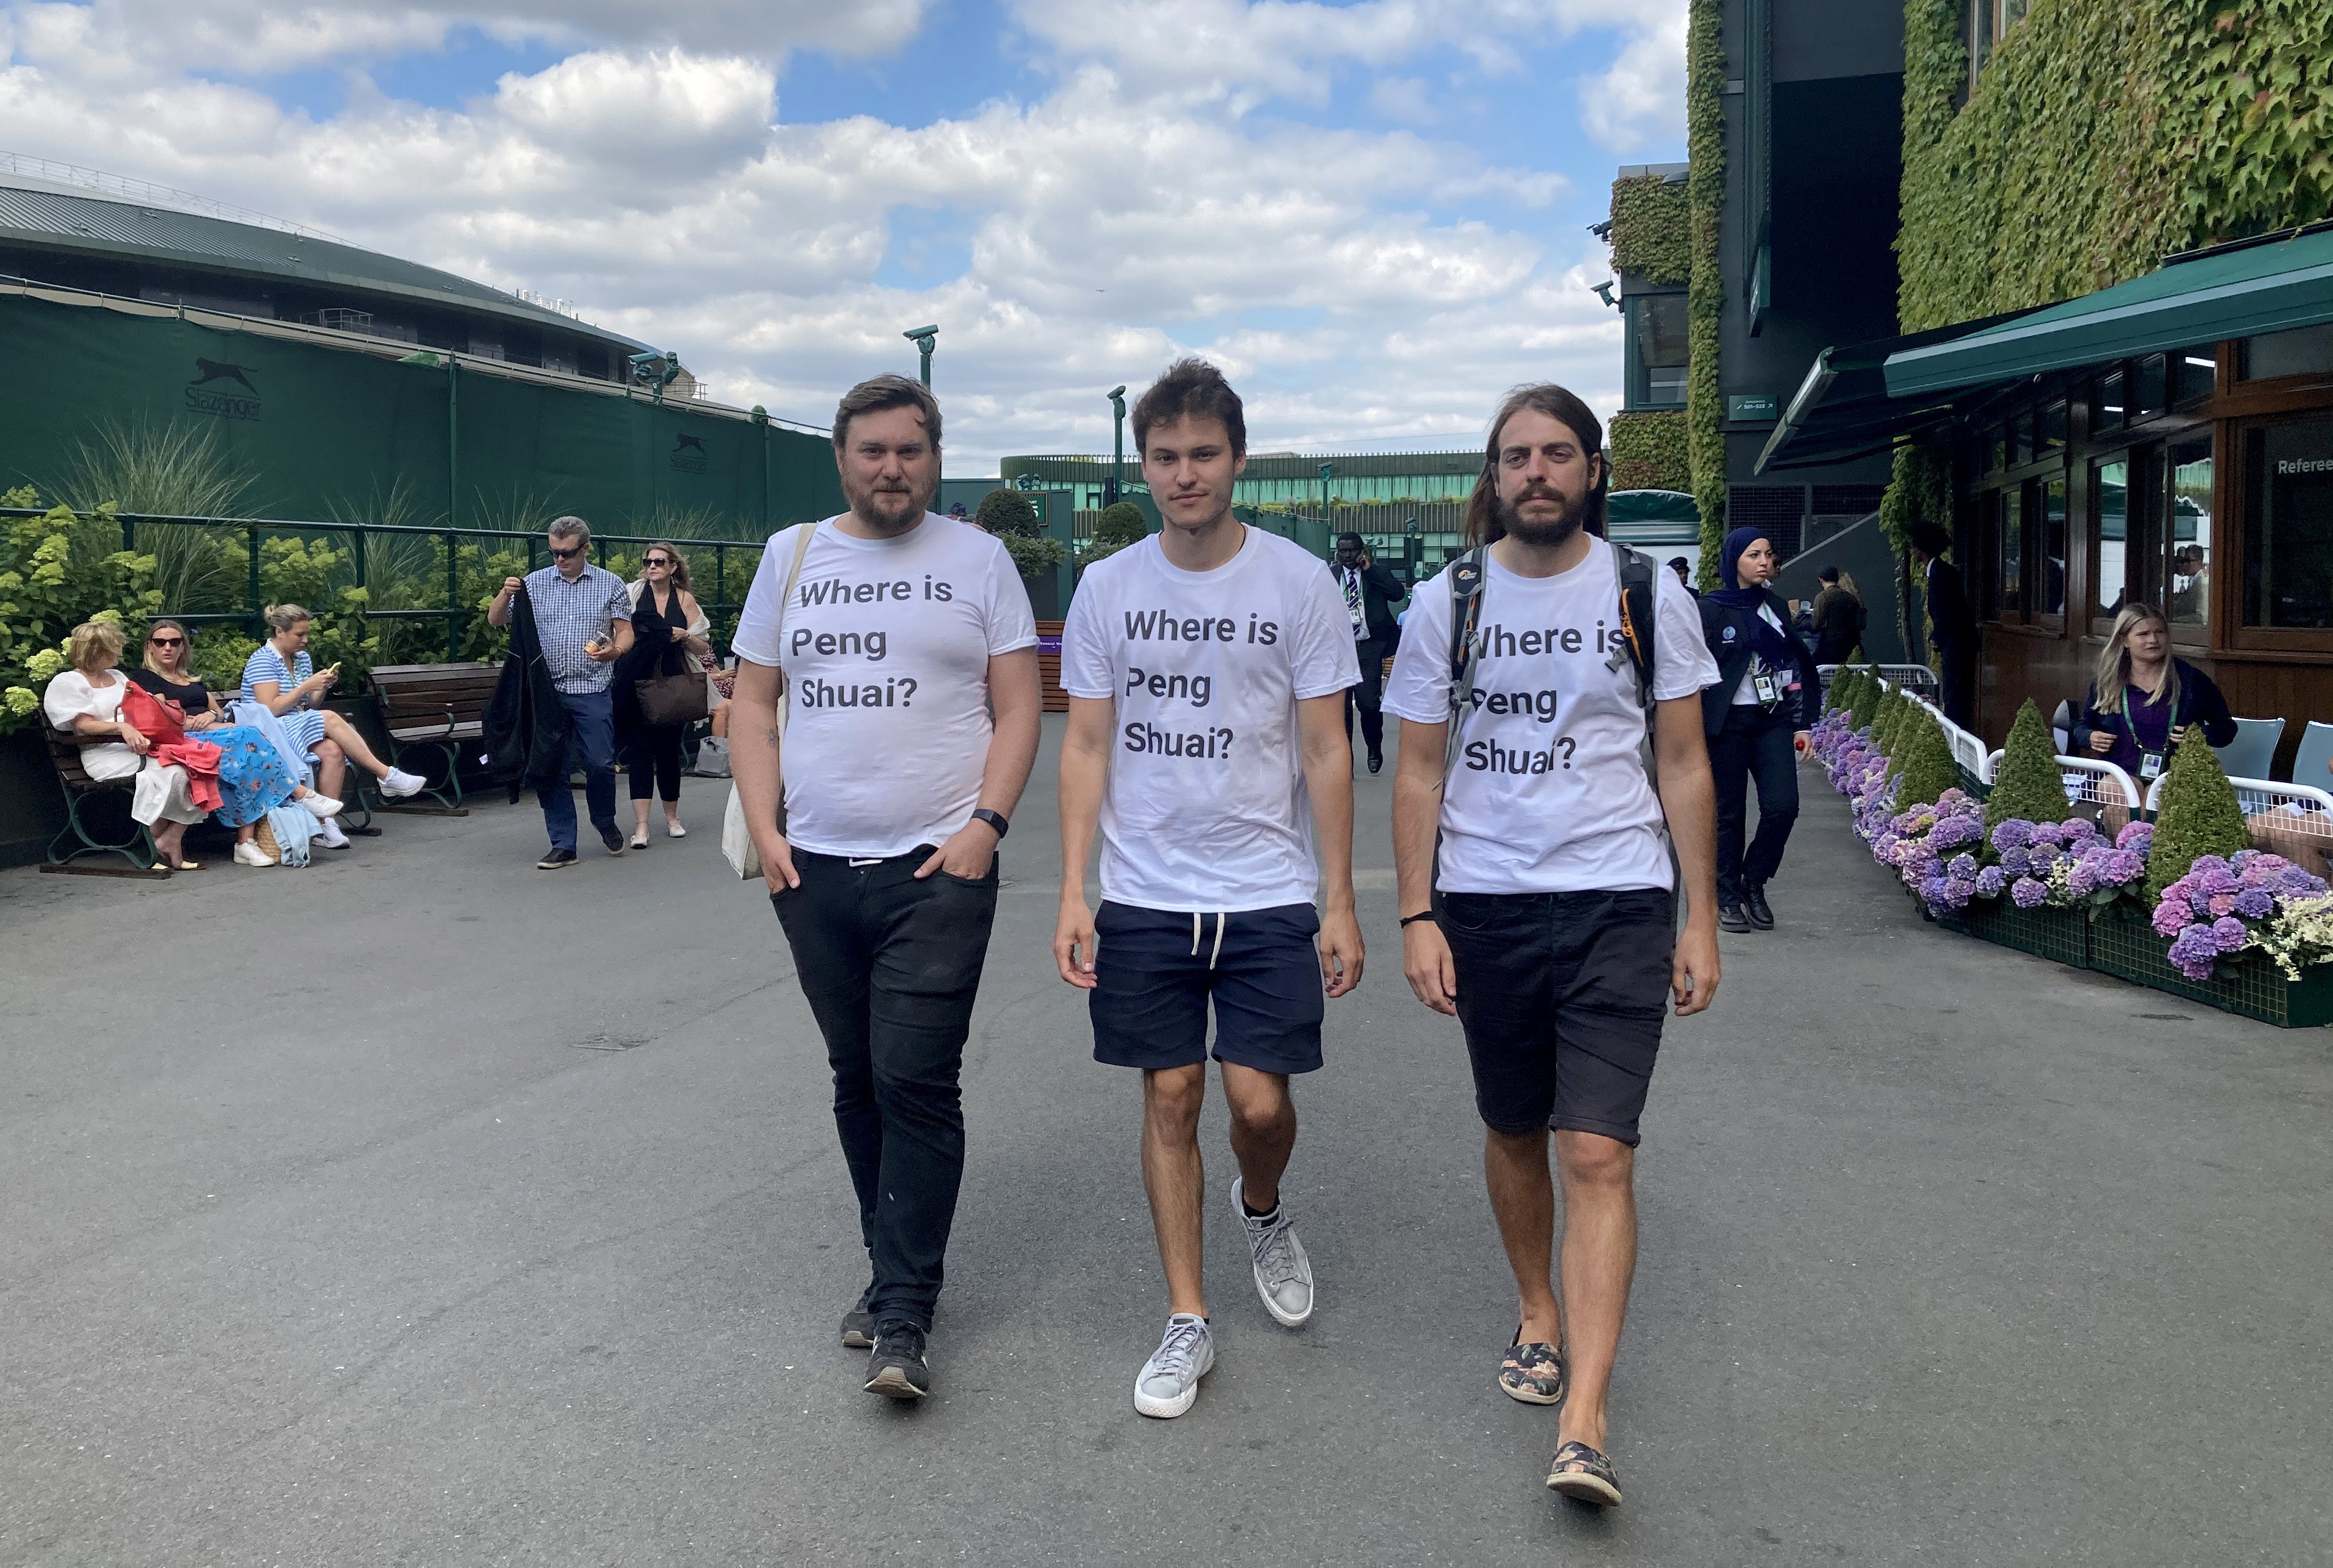 Protesters (left to right) Will Hoyles, 39, Caleb Compton, 27, and Jason Leith, 34, who all work for Free Tibet who have come to Wimbledon to draw attention to Peng Shuai. Picture date: Monday July 4, 2022.